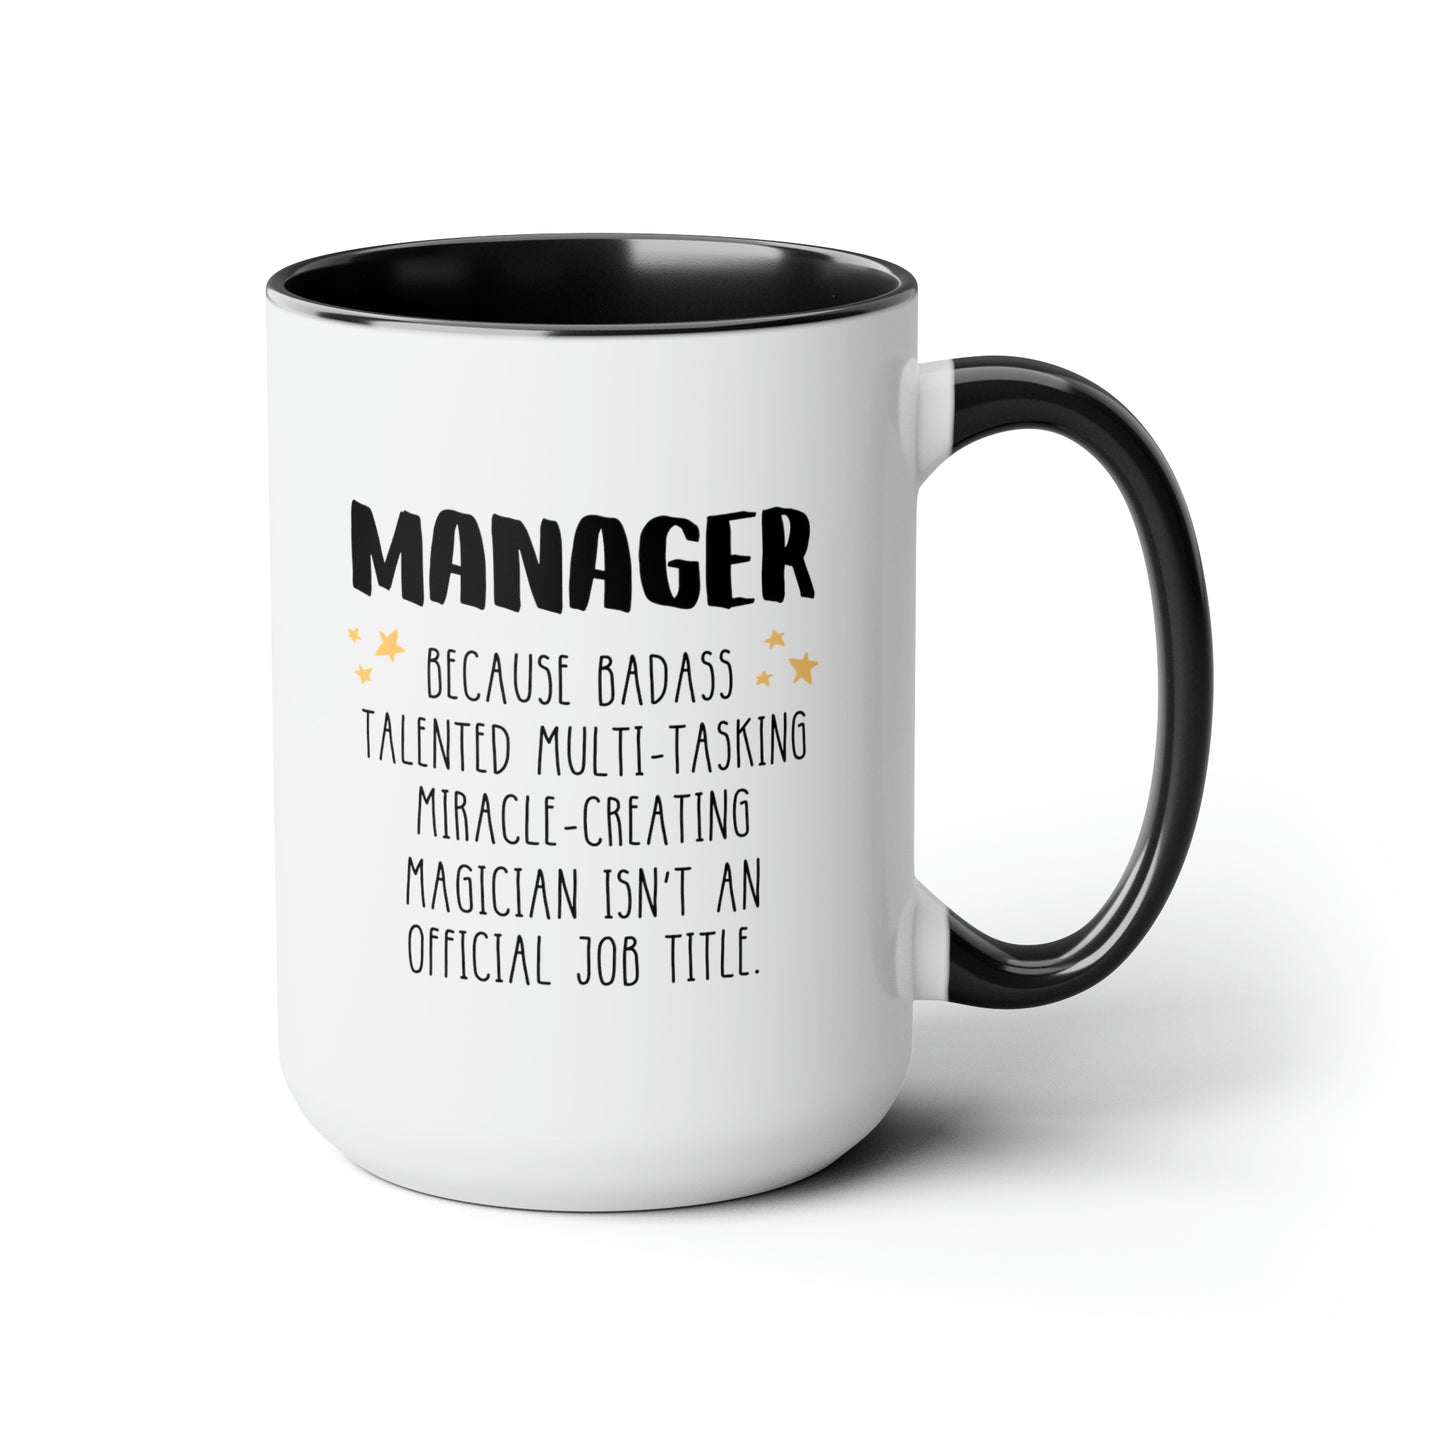 Manager Because Badass Talented Multi-tasking Miracle-creating Magician Isnt An Official Job Title 15oz white with black accent funny large coffee mug waveywares wavey wares wavywares wavy wares